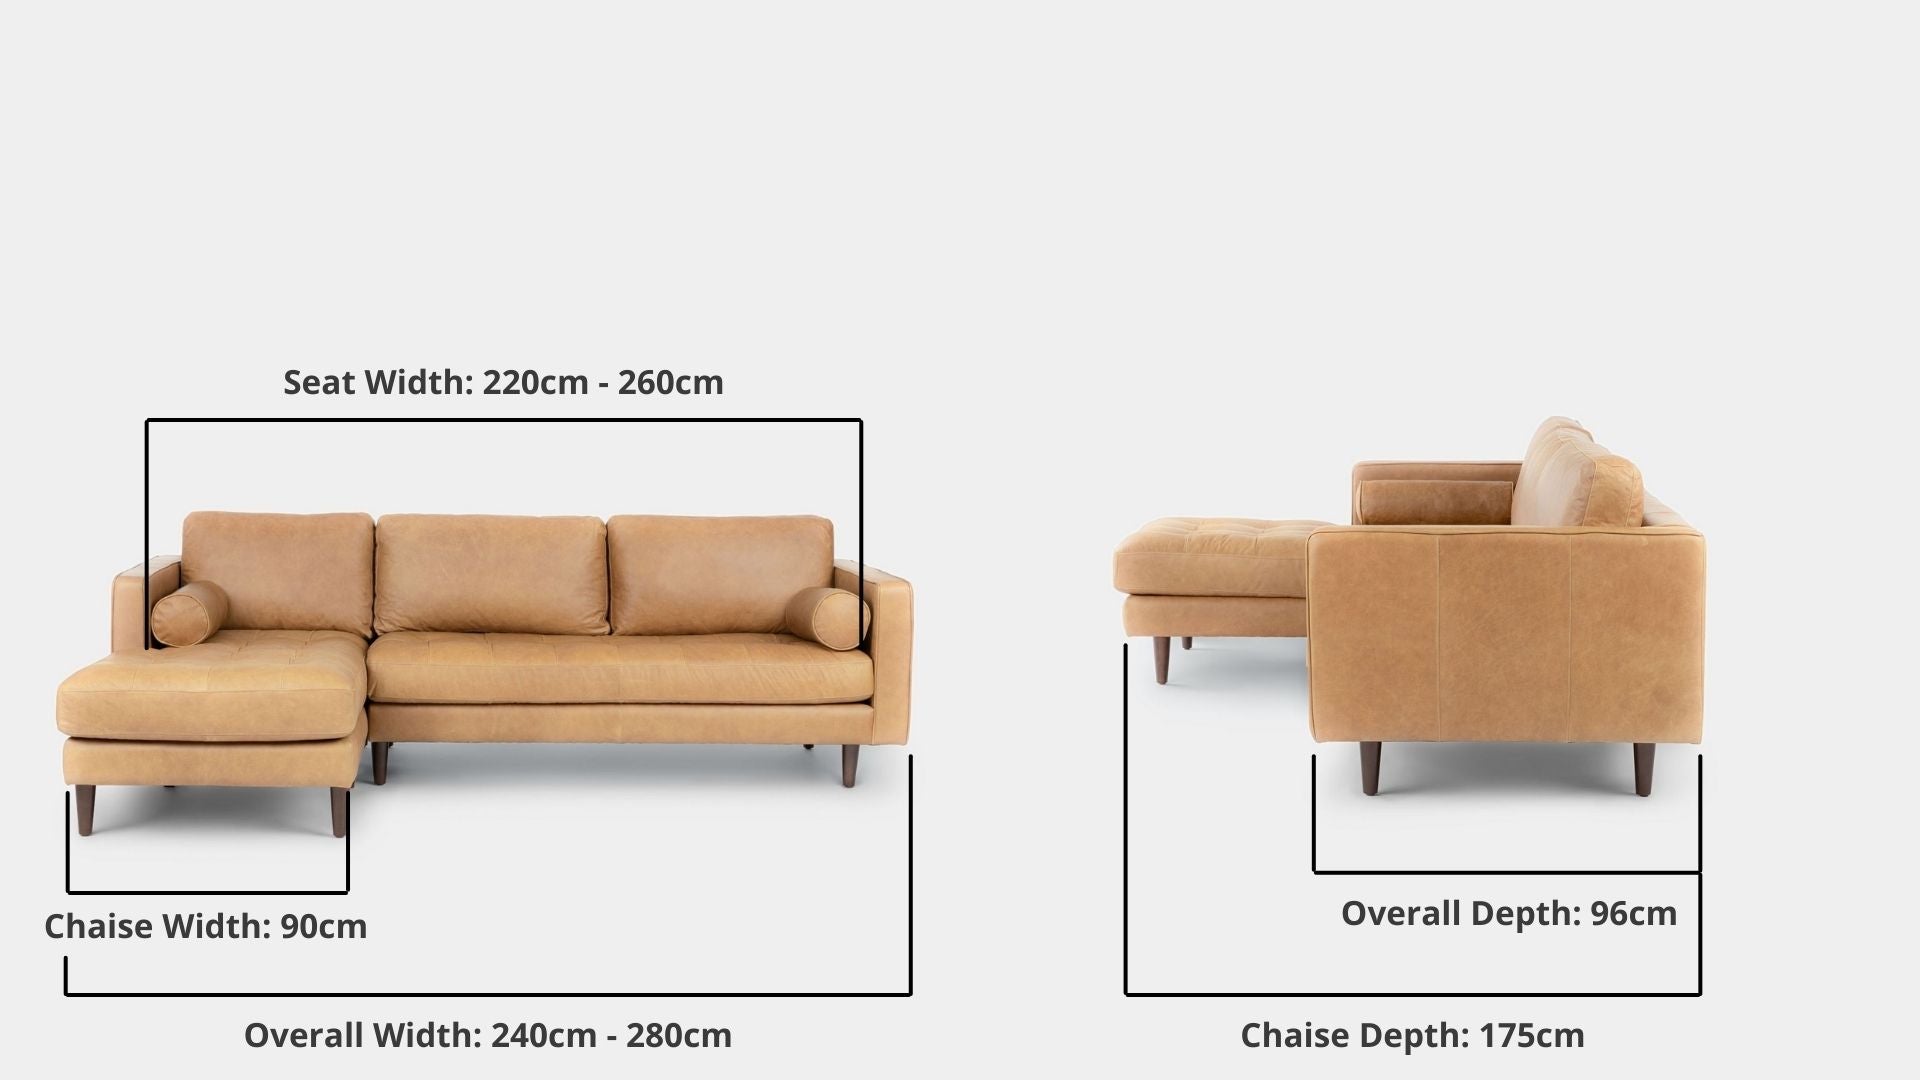 Details the key dimensions in terms of overall width, overall depth and seat width for Castle Half Leather Sectional Sofa